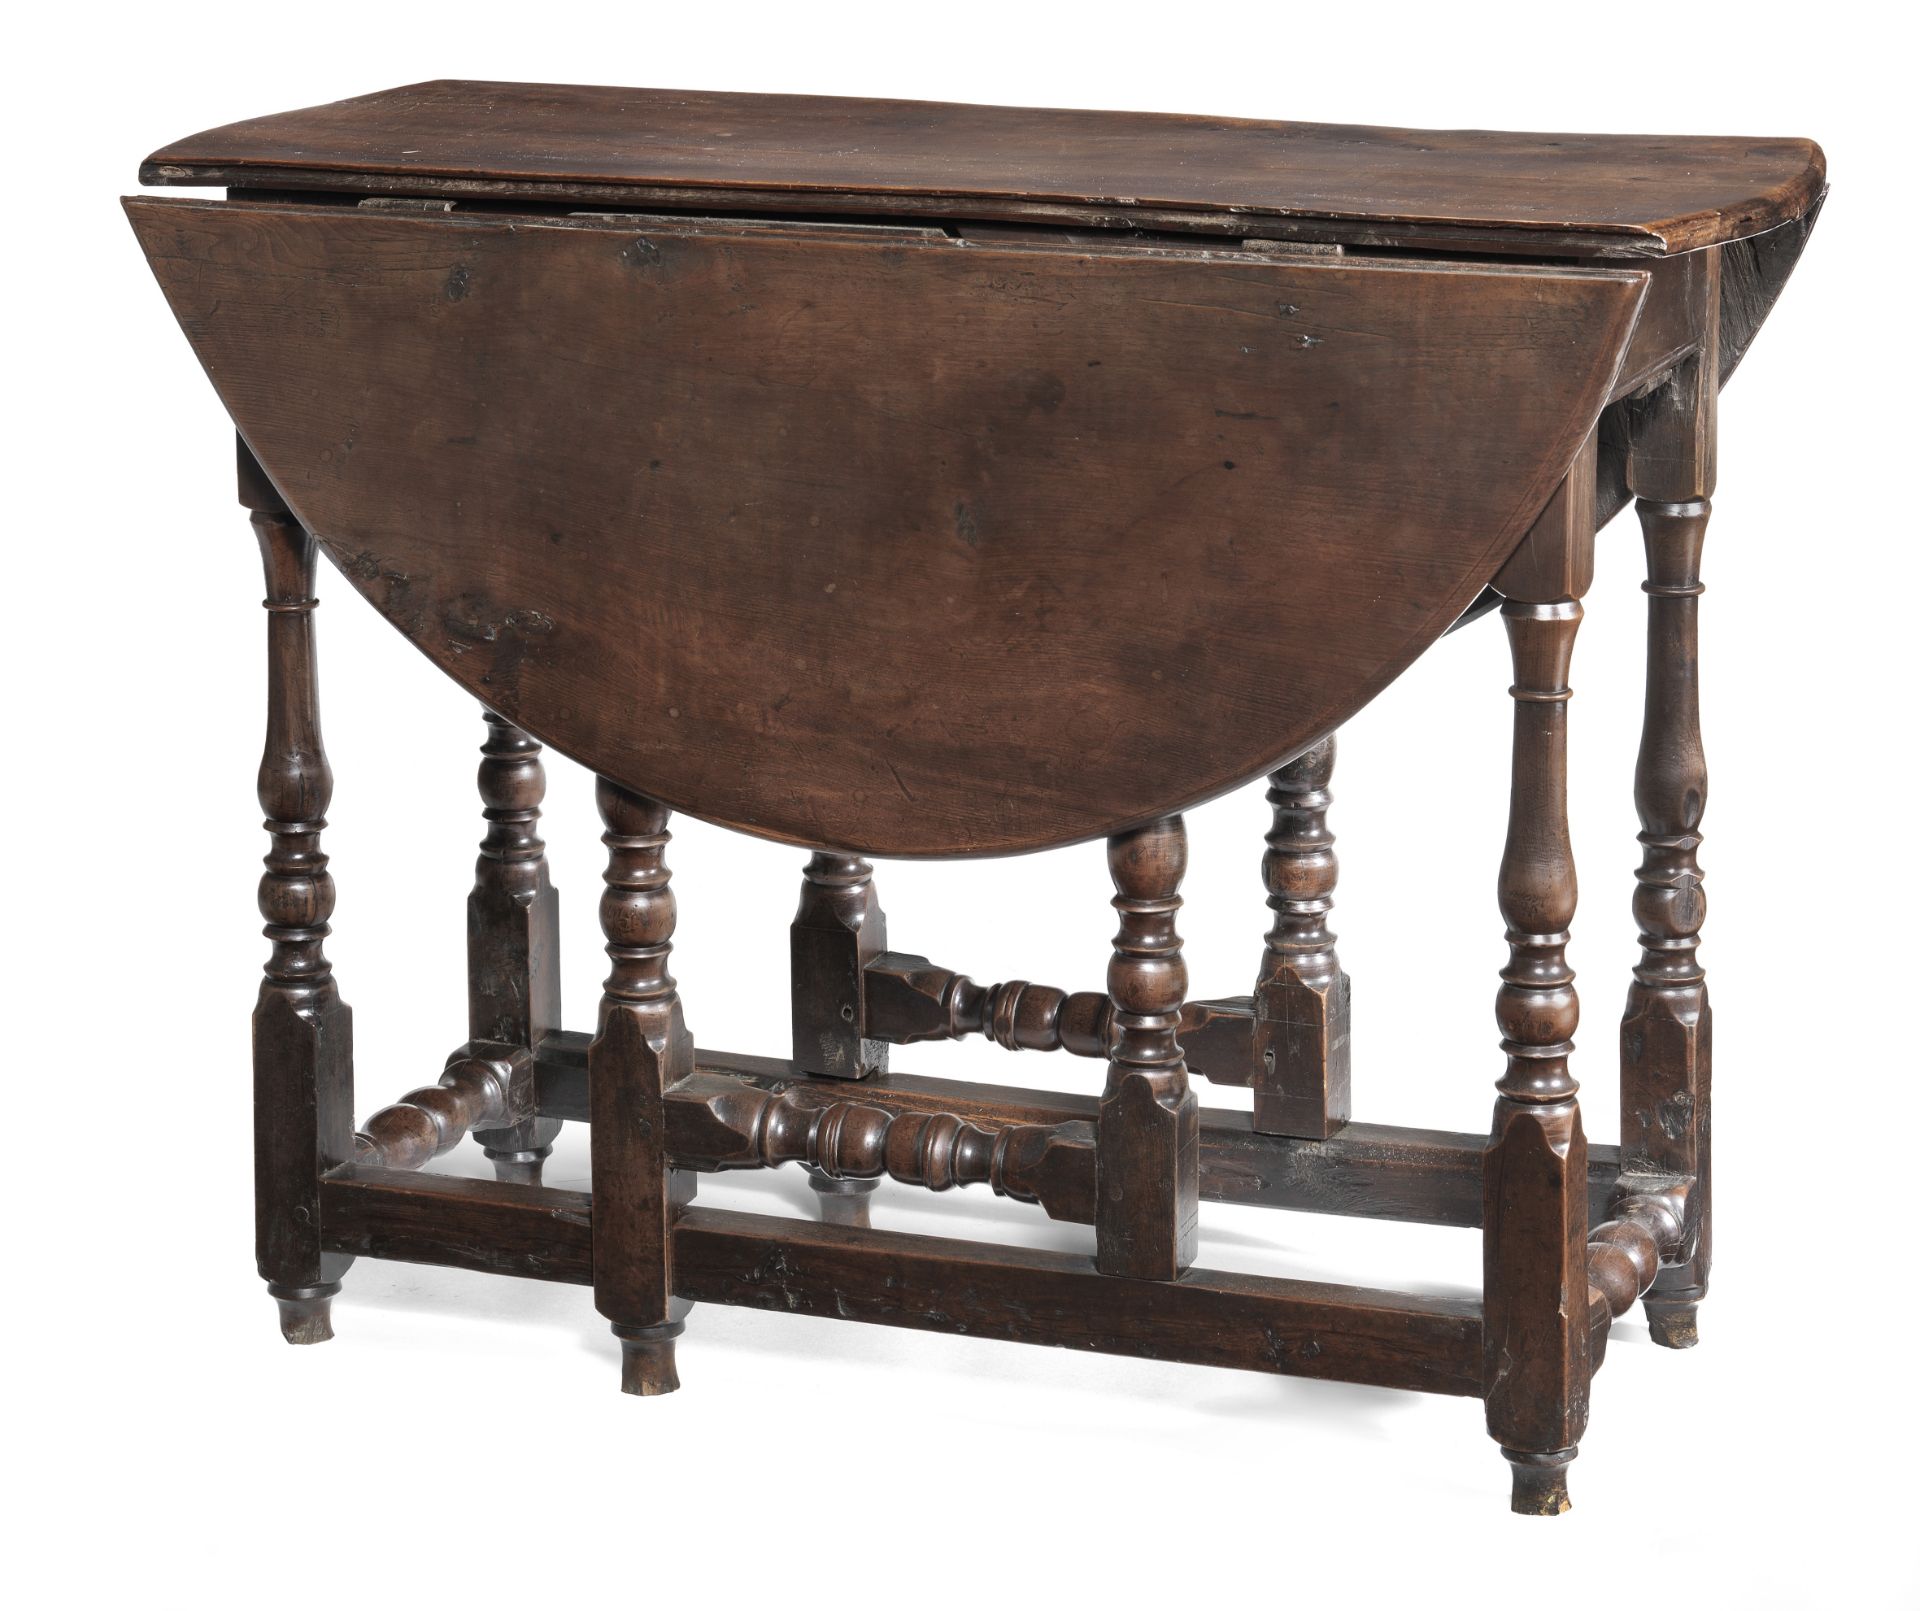 A William & Mary joined yew-wood gateleg table, circa 1700